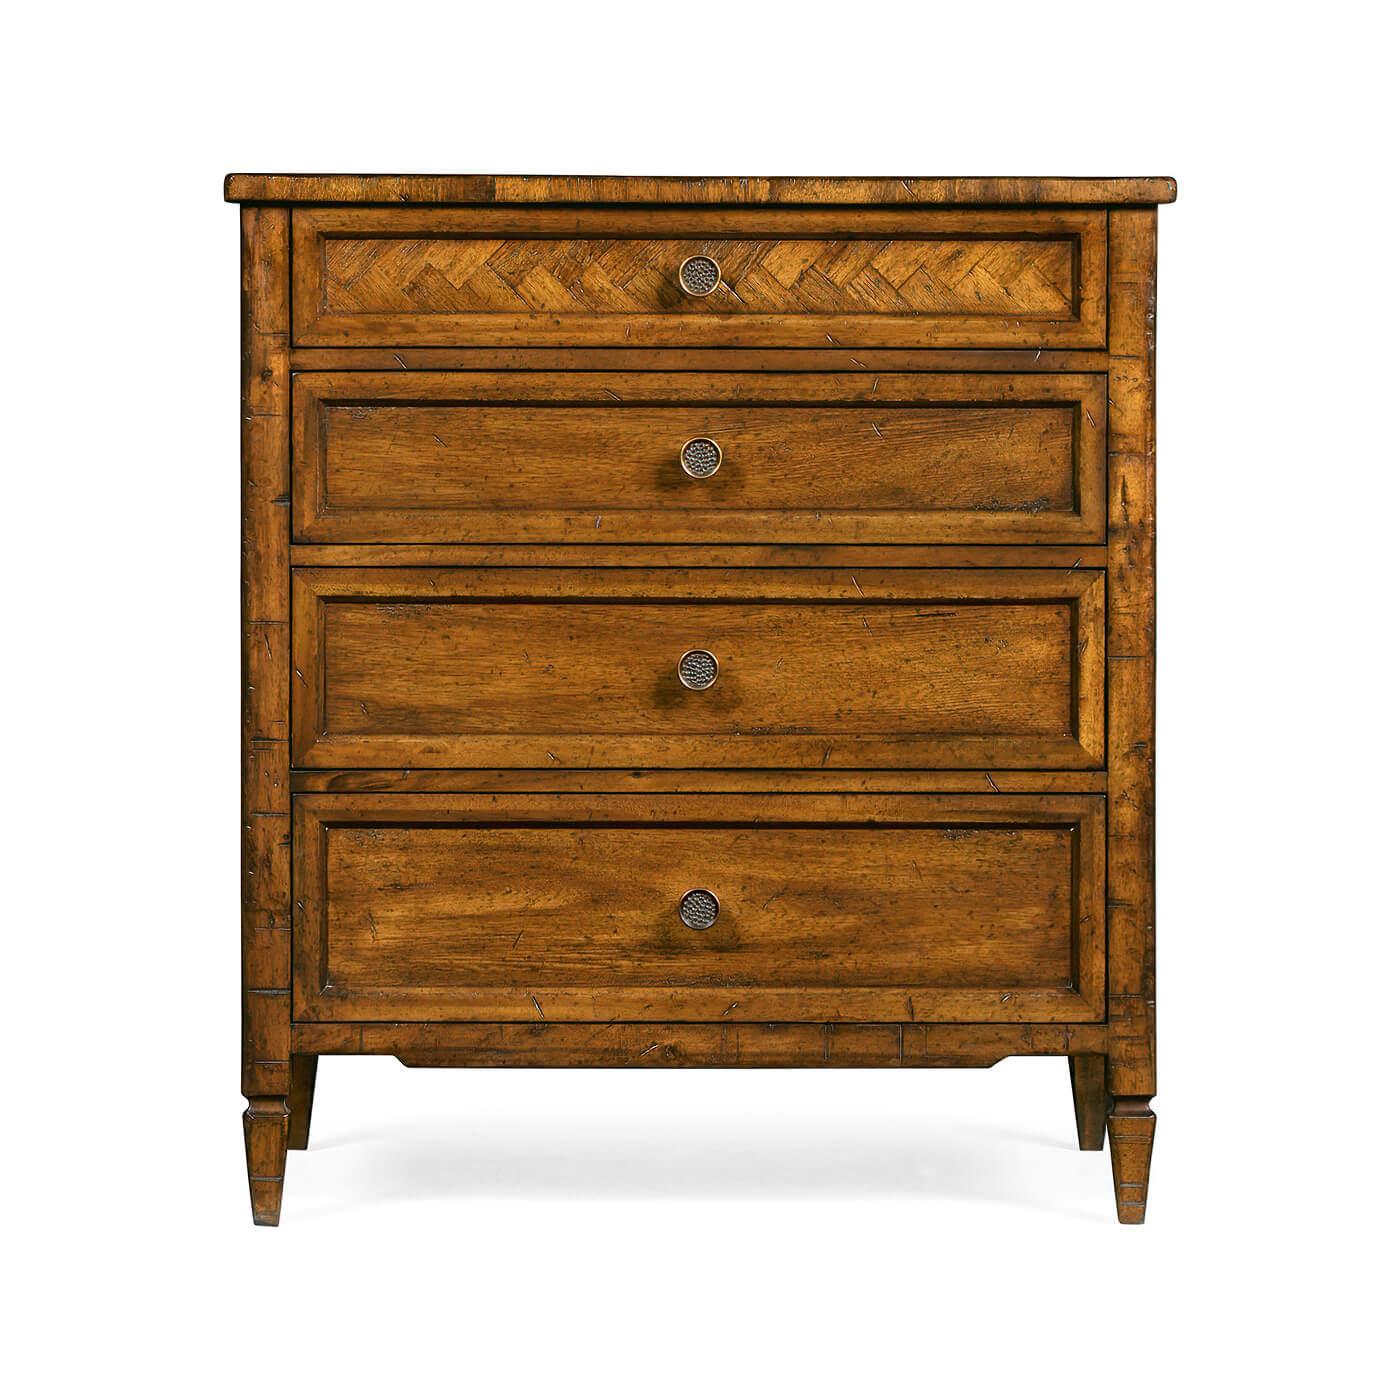 A pair of English Country walnut four-drawer bedside chests of drawers with a rustic antiqued finish, a herringbone form parquetry inlaid top drawer on square tapered legs. 

Dimensions: 26